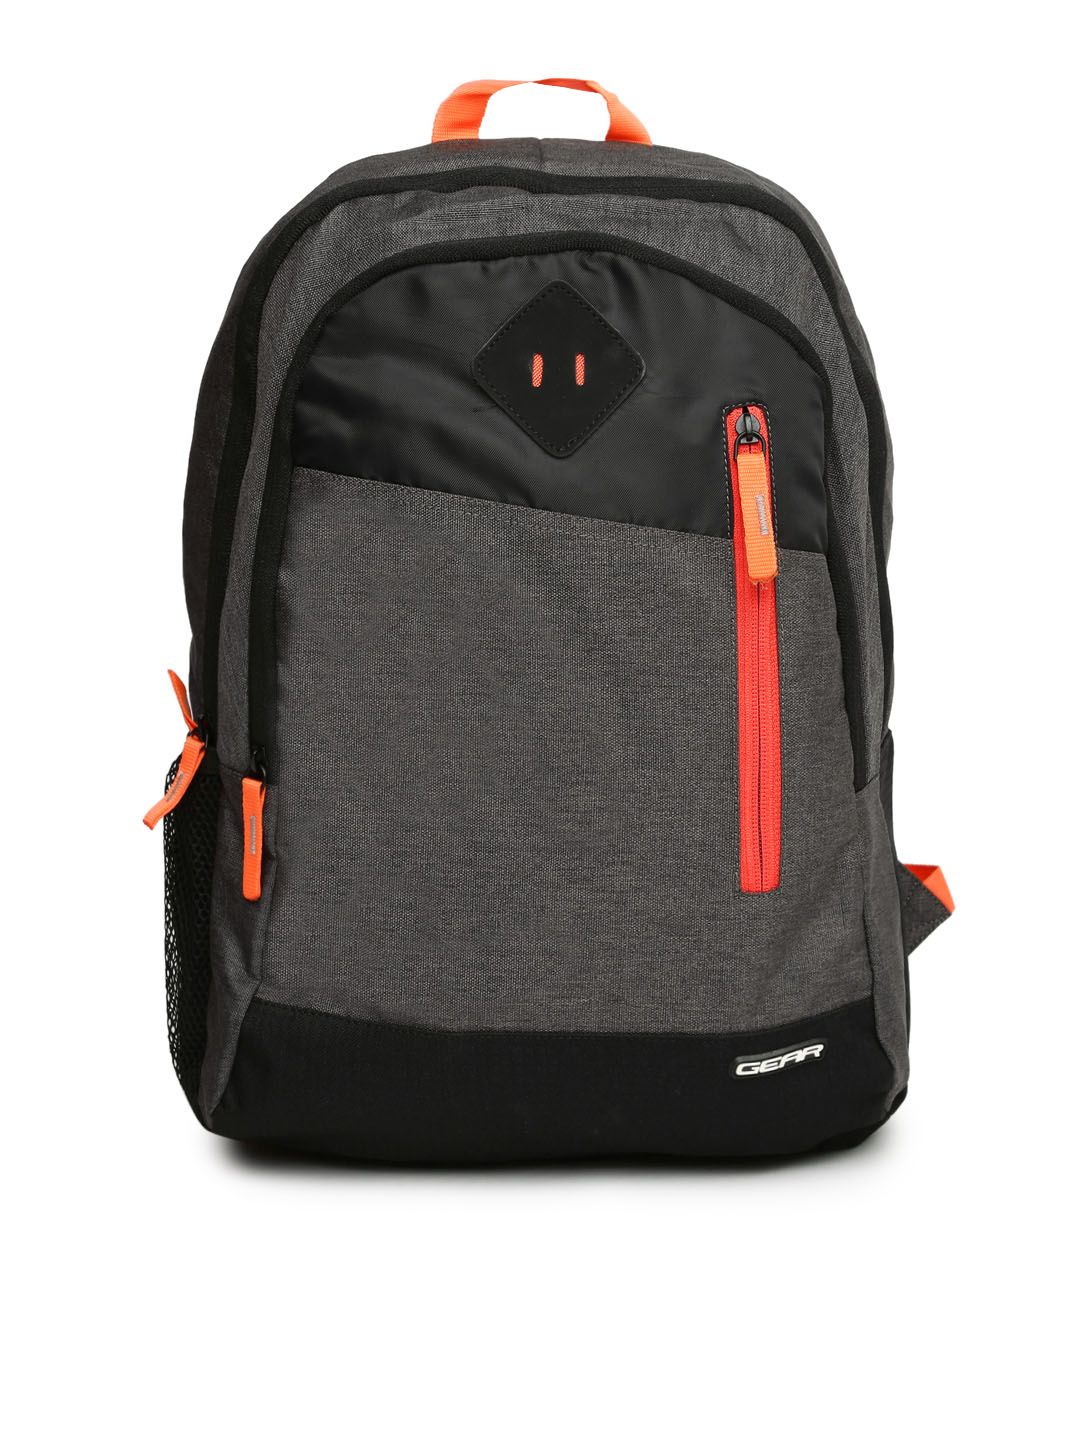 Gear Unisex Grey Solid Backpack Price in India